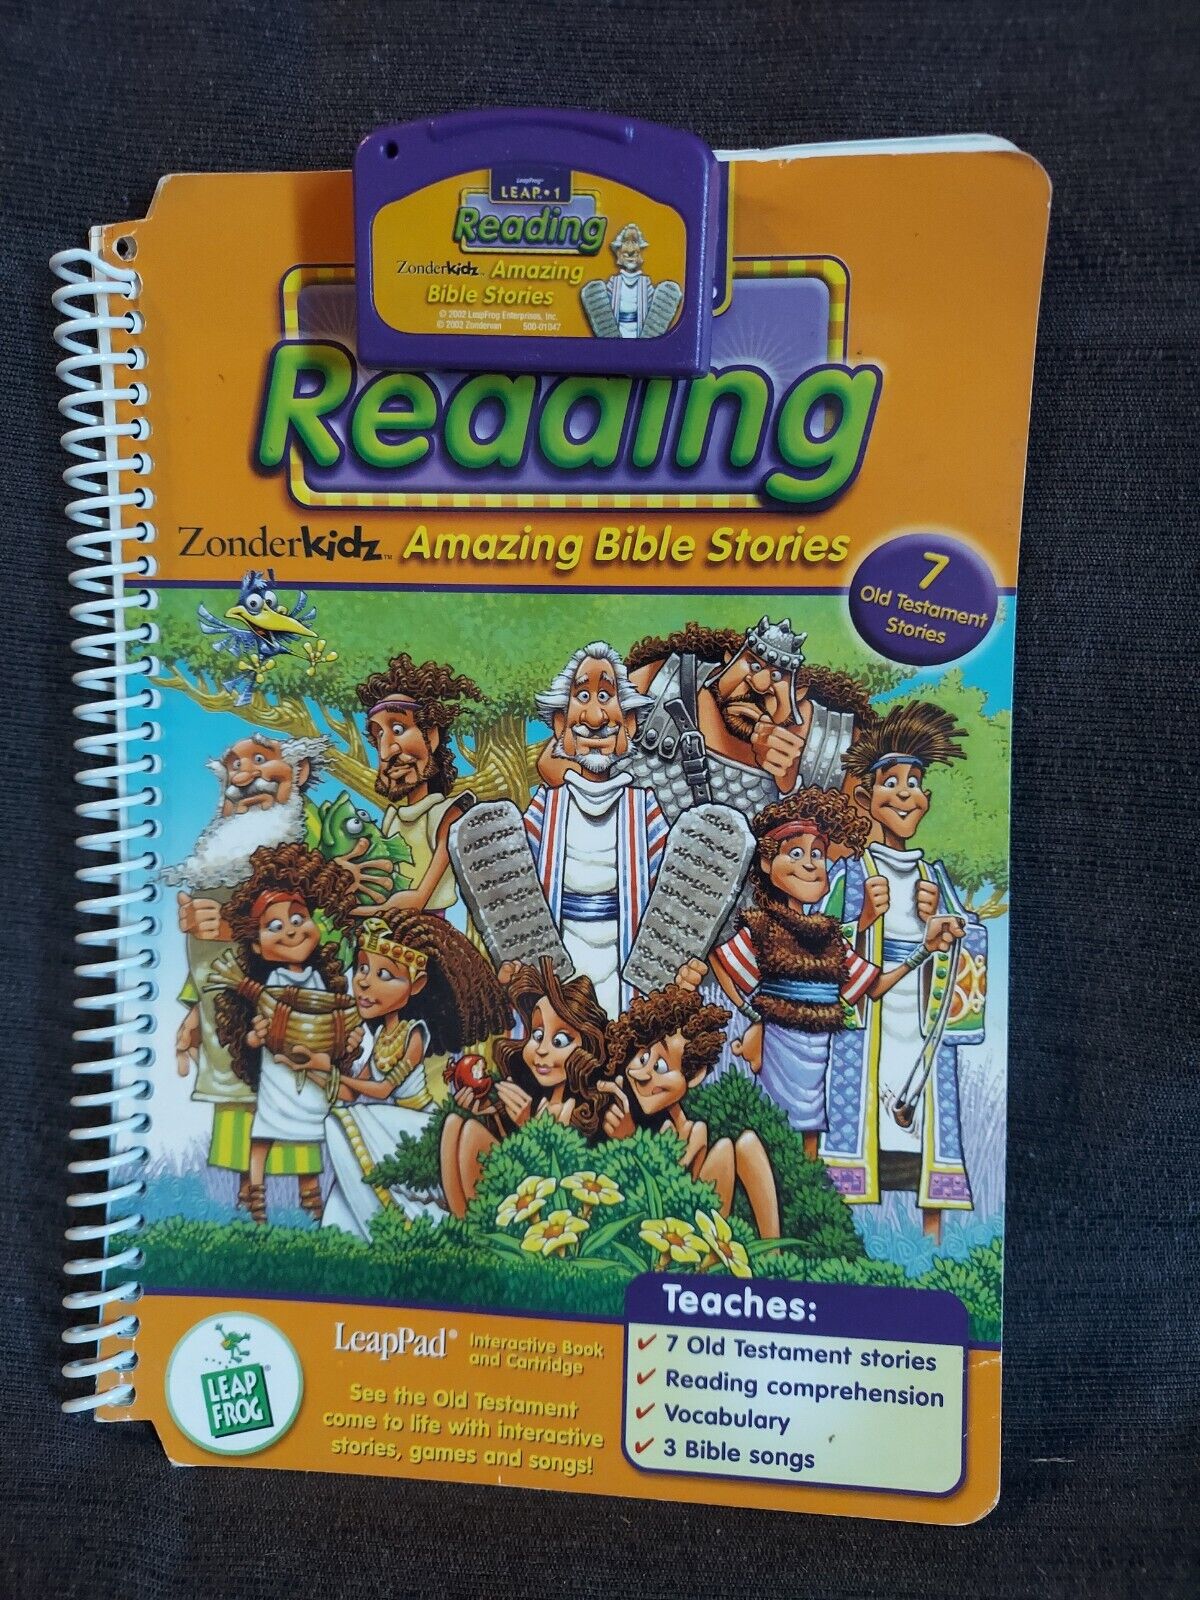 LeapFrog Leap 1 Reading: Amazing Bible Stories 7 Old Testament Stories 